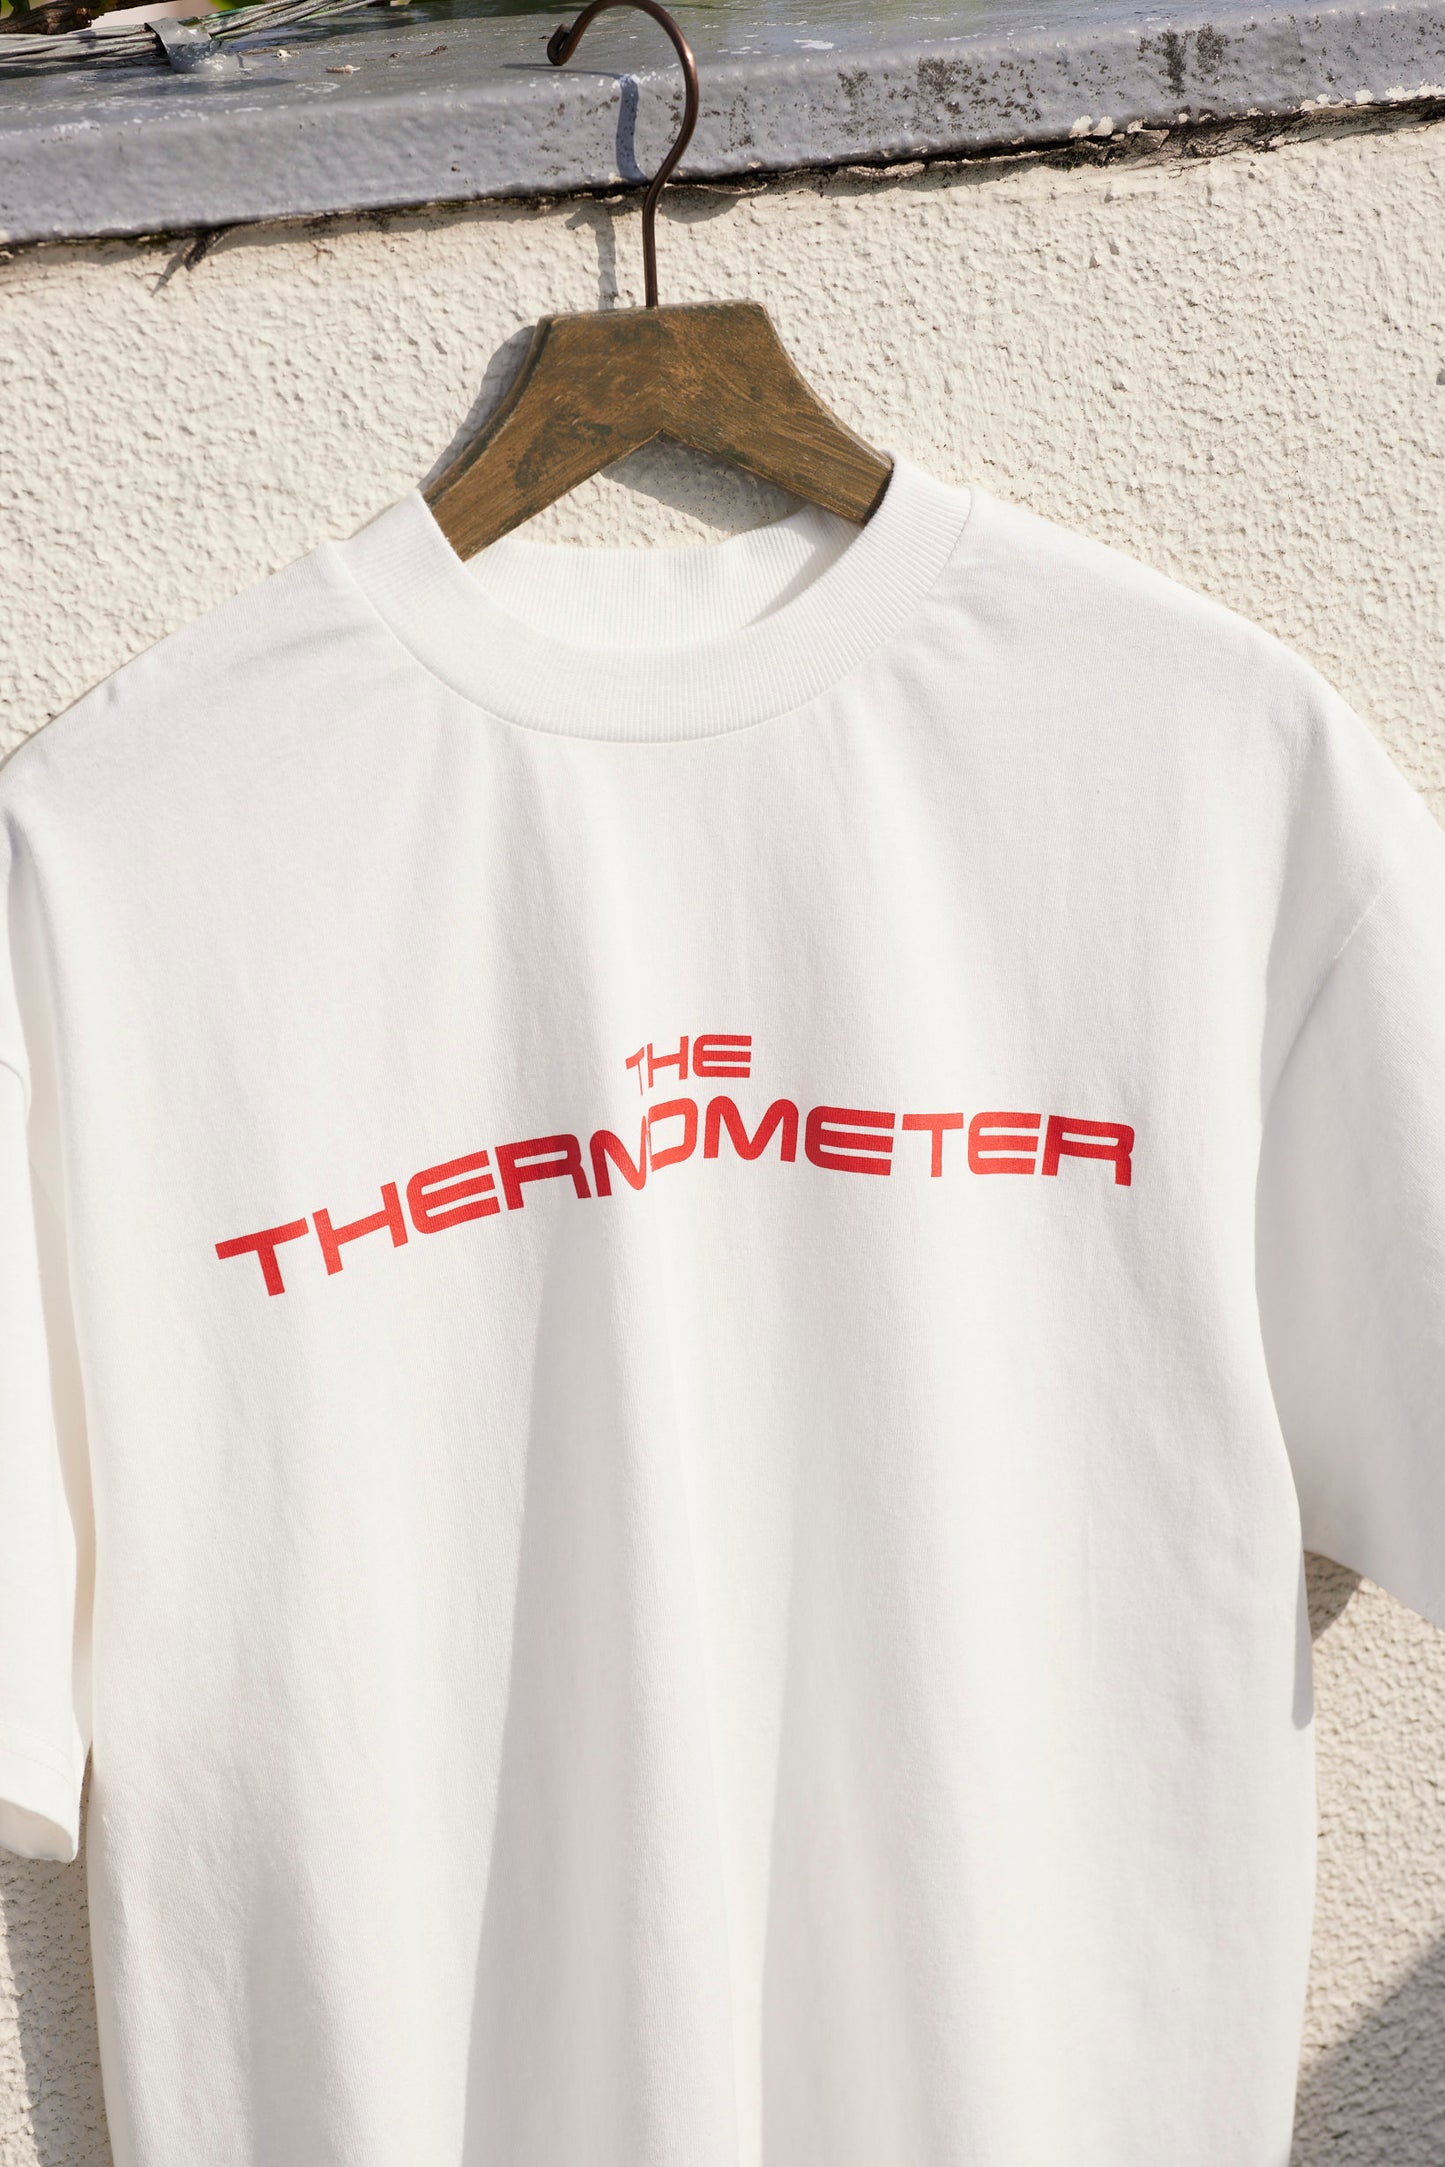 the thermomater t-shirts